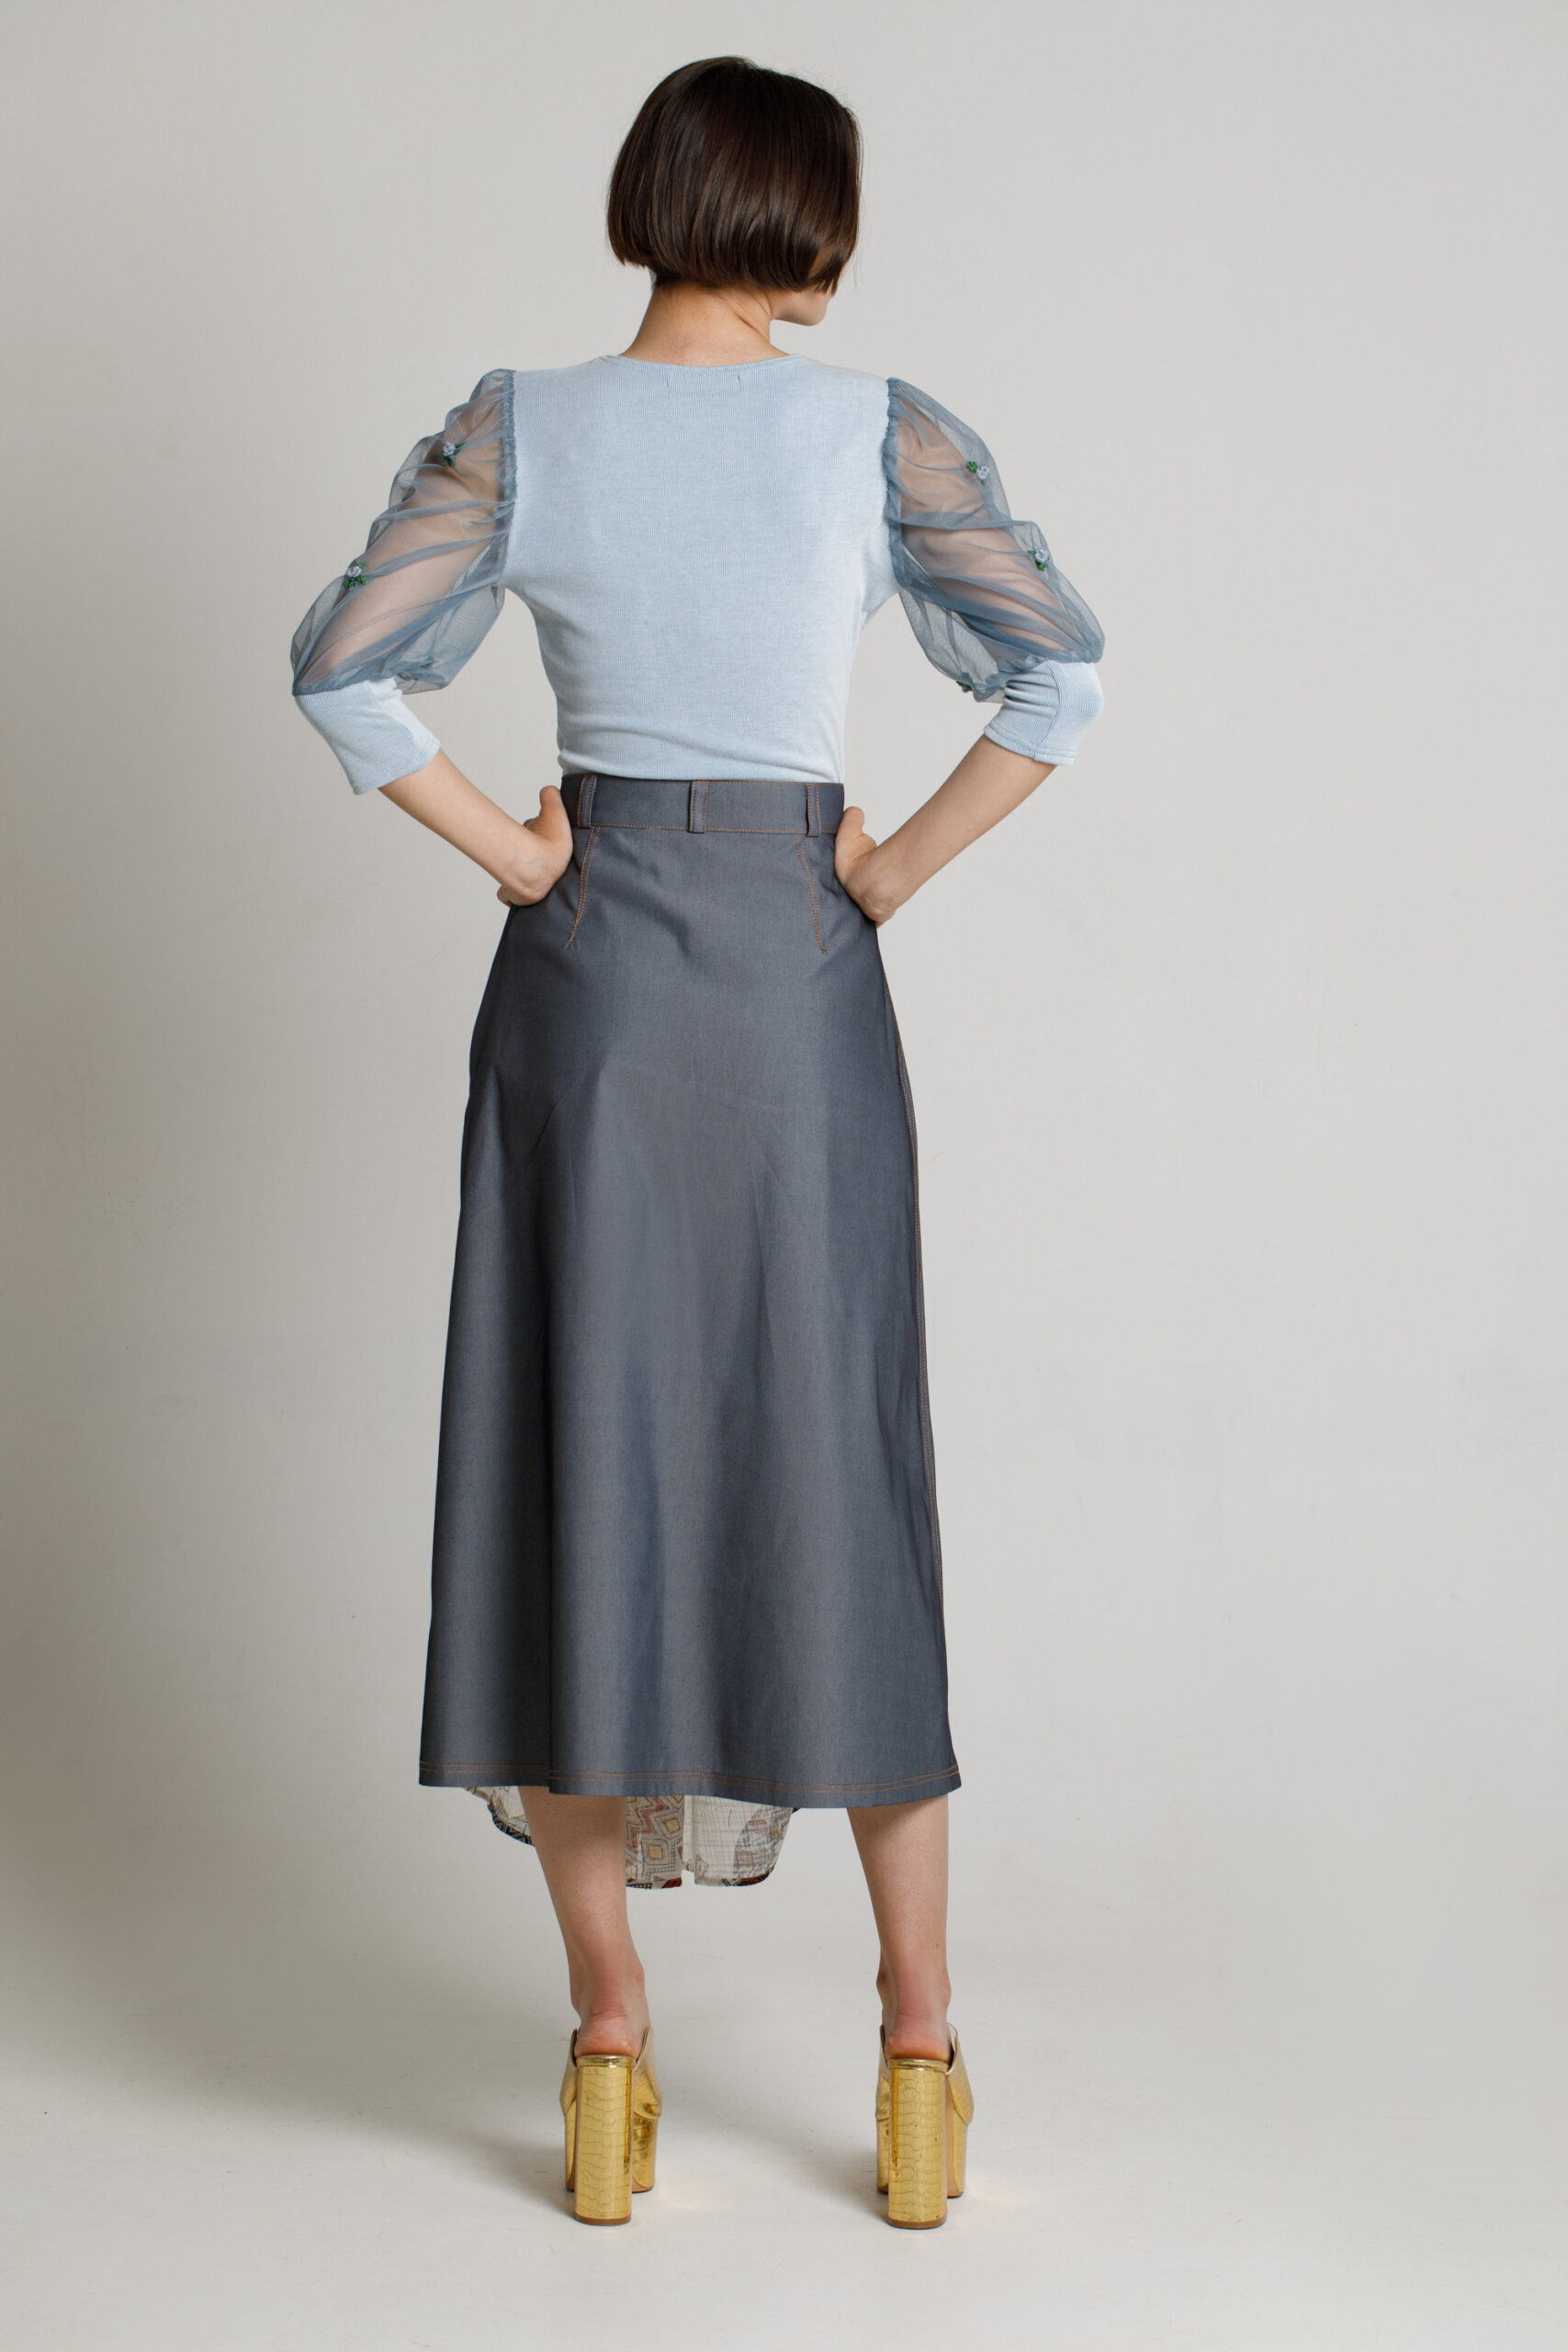 VAS casual blue blouse with tulle sleeves. Natural fabrics, original design, handmade embroidery